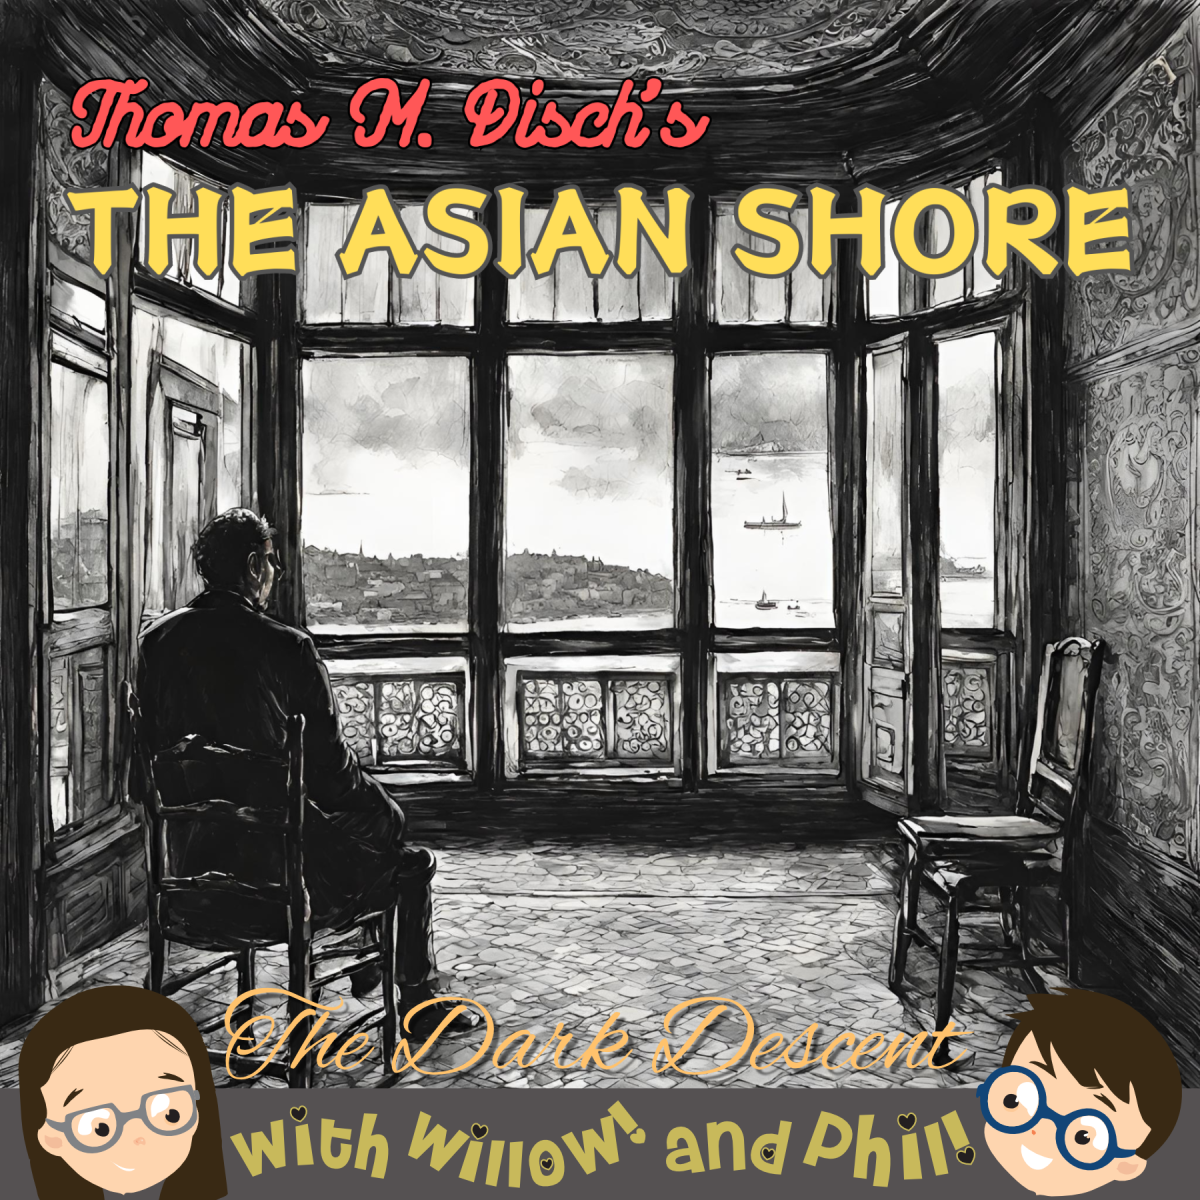 The Dark Descent – “The Asian Shore” by Thomas M. Disch